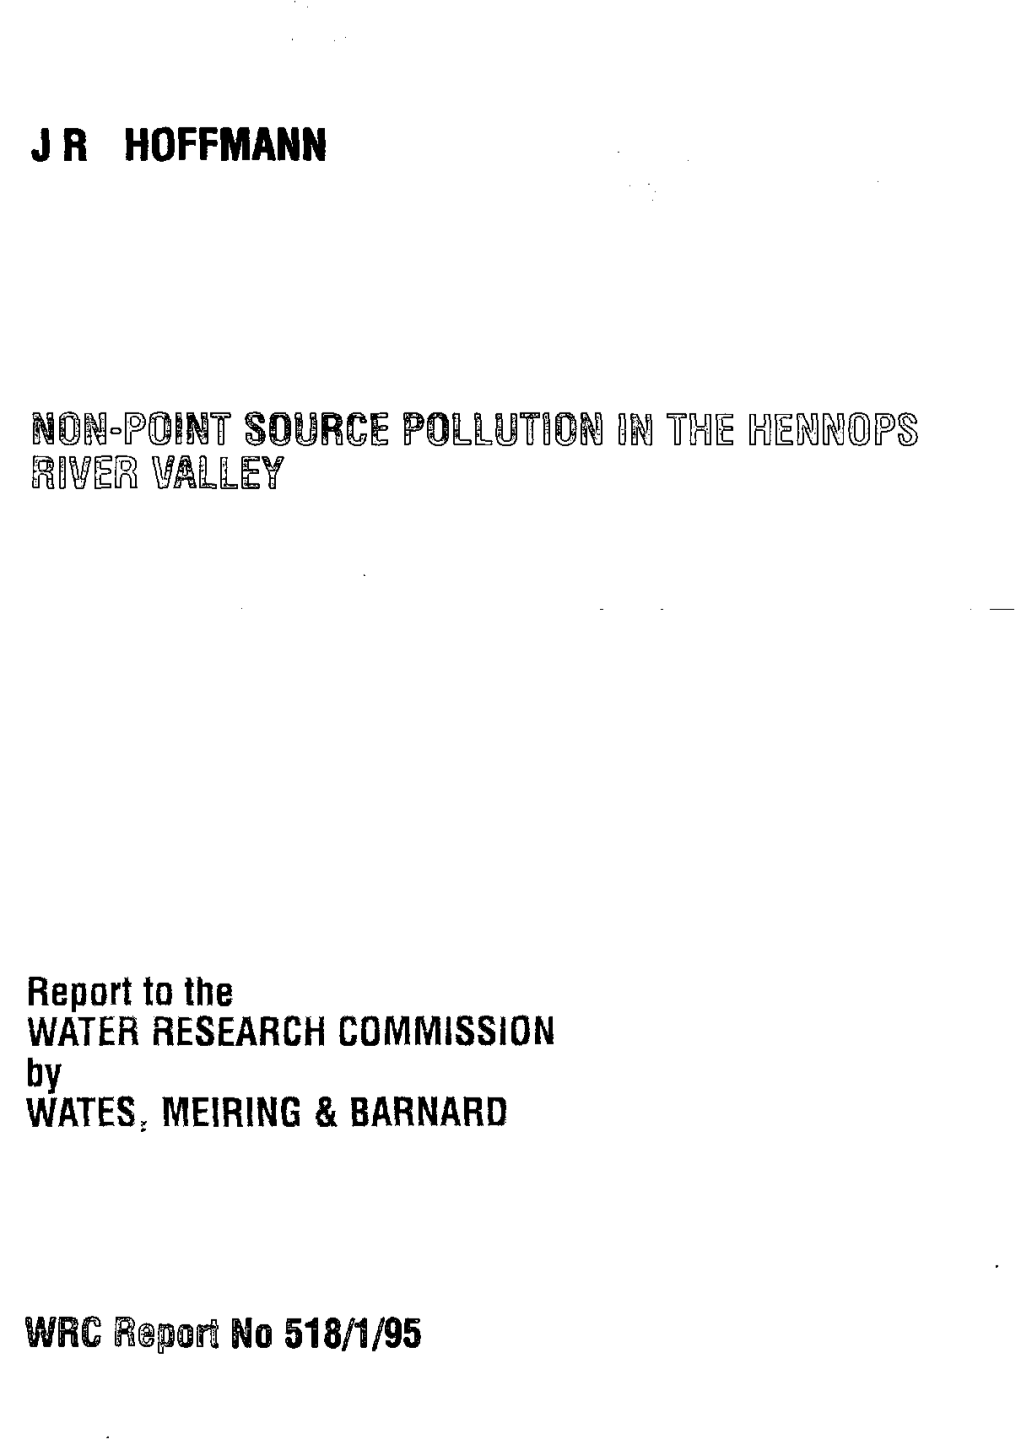 Non-Point Source Pollution in the Hennops River Valley